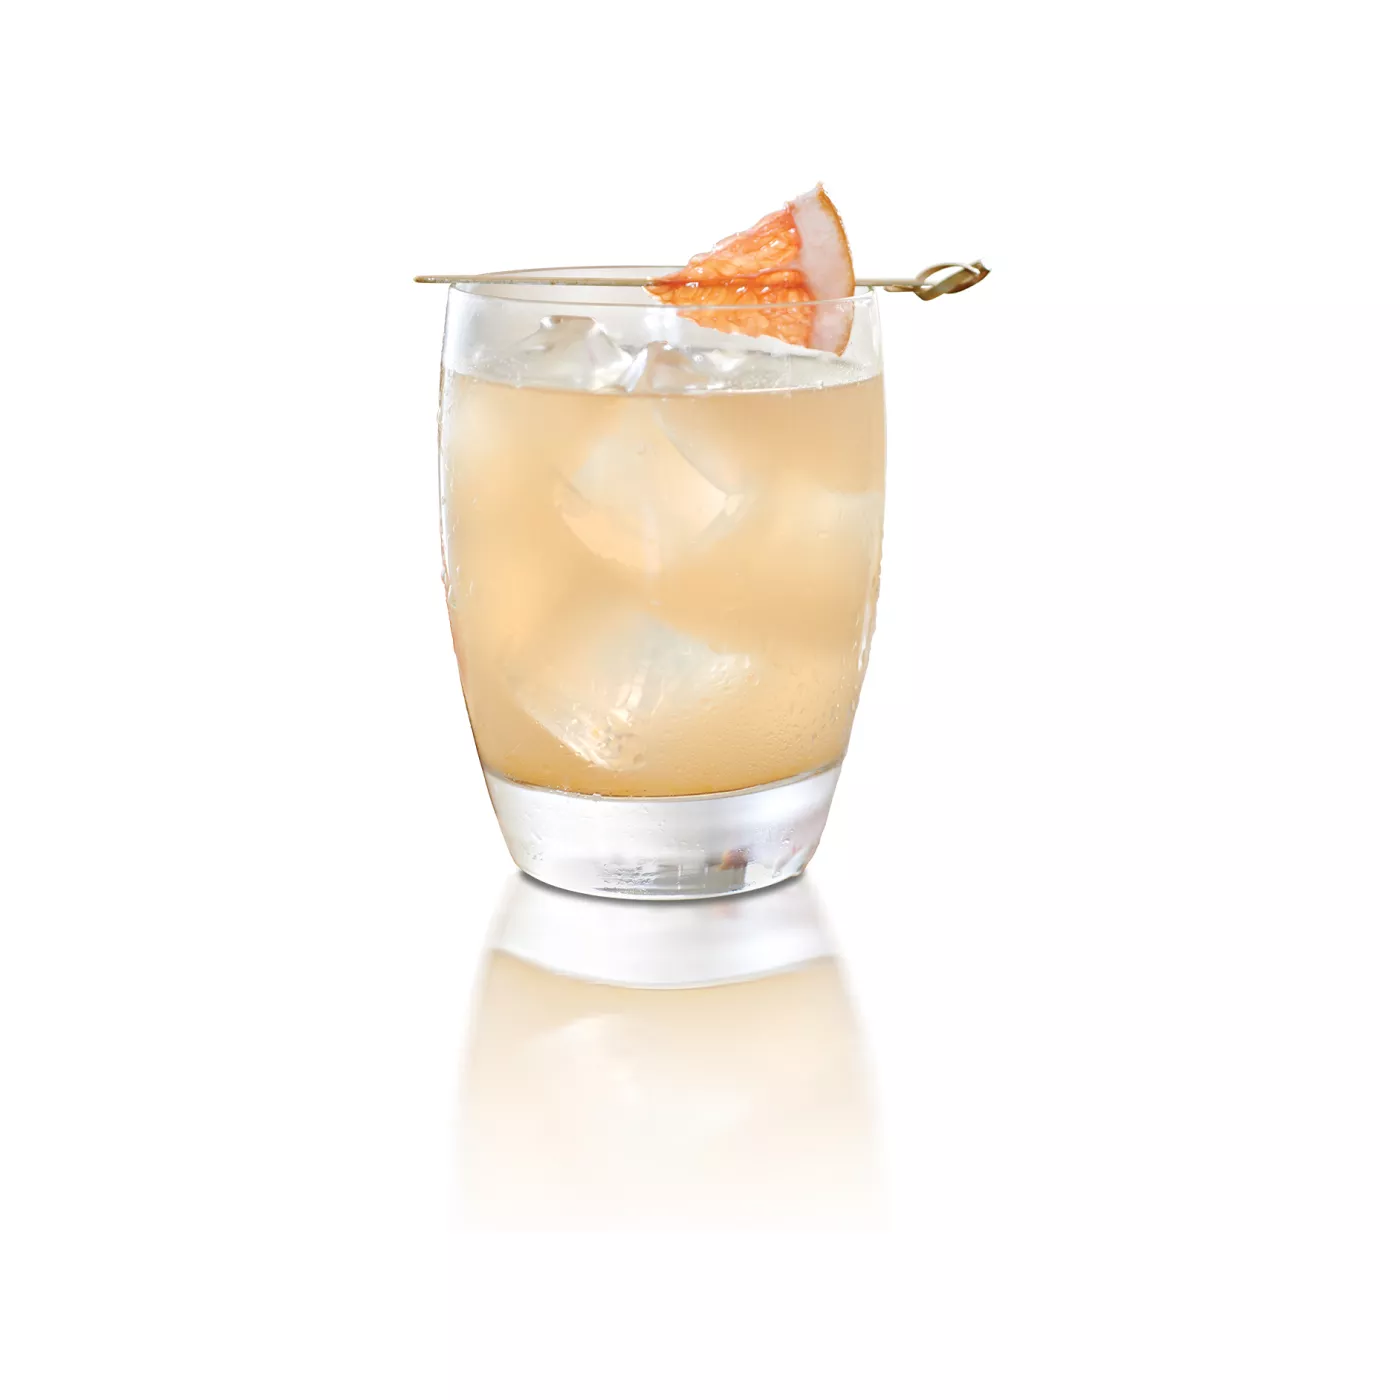 Image of a glass filled with paloma cocktail